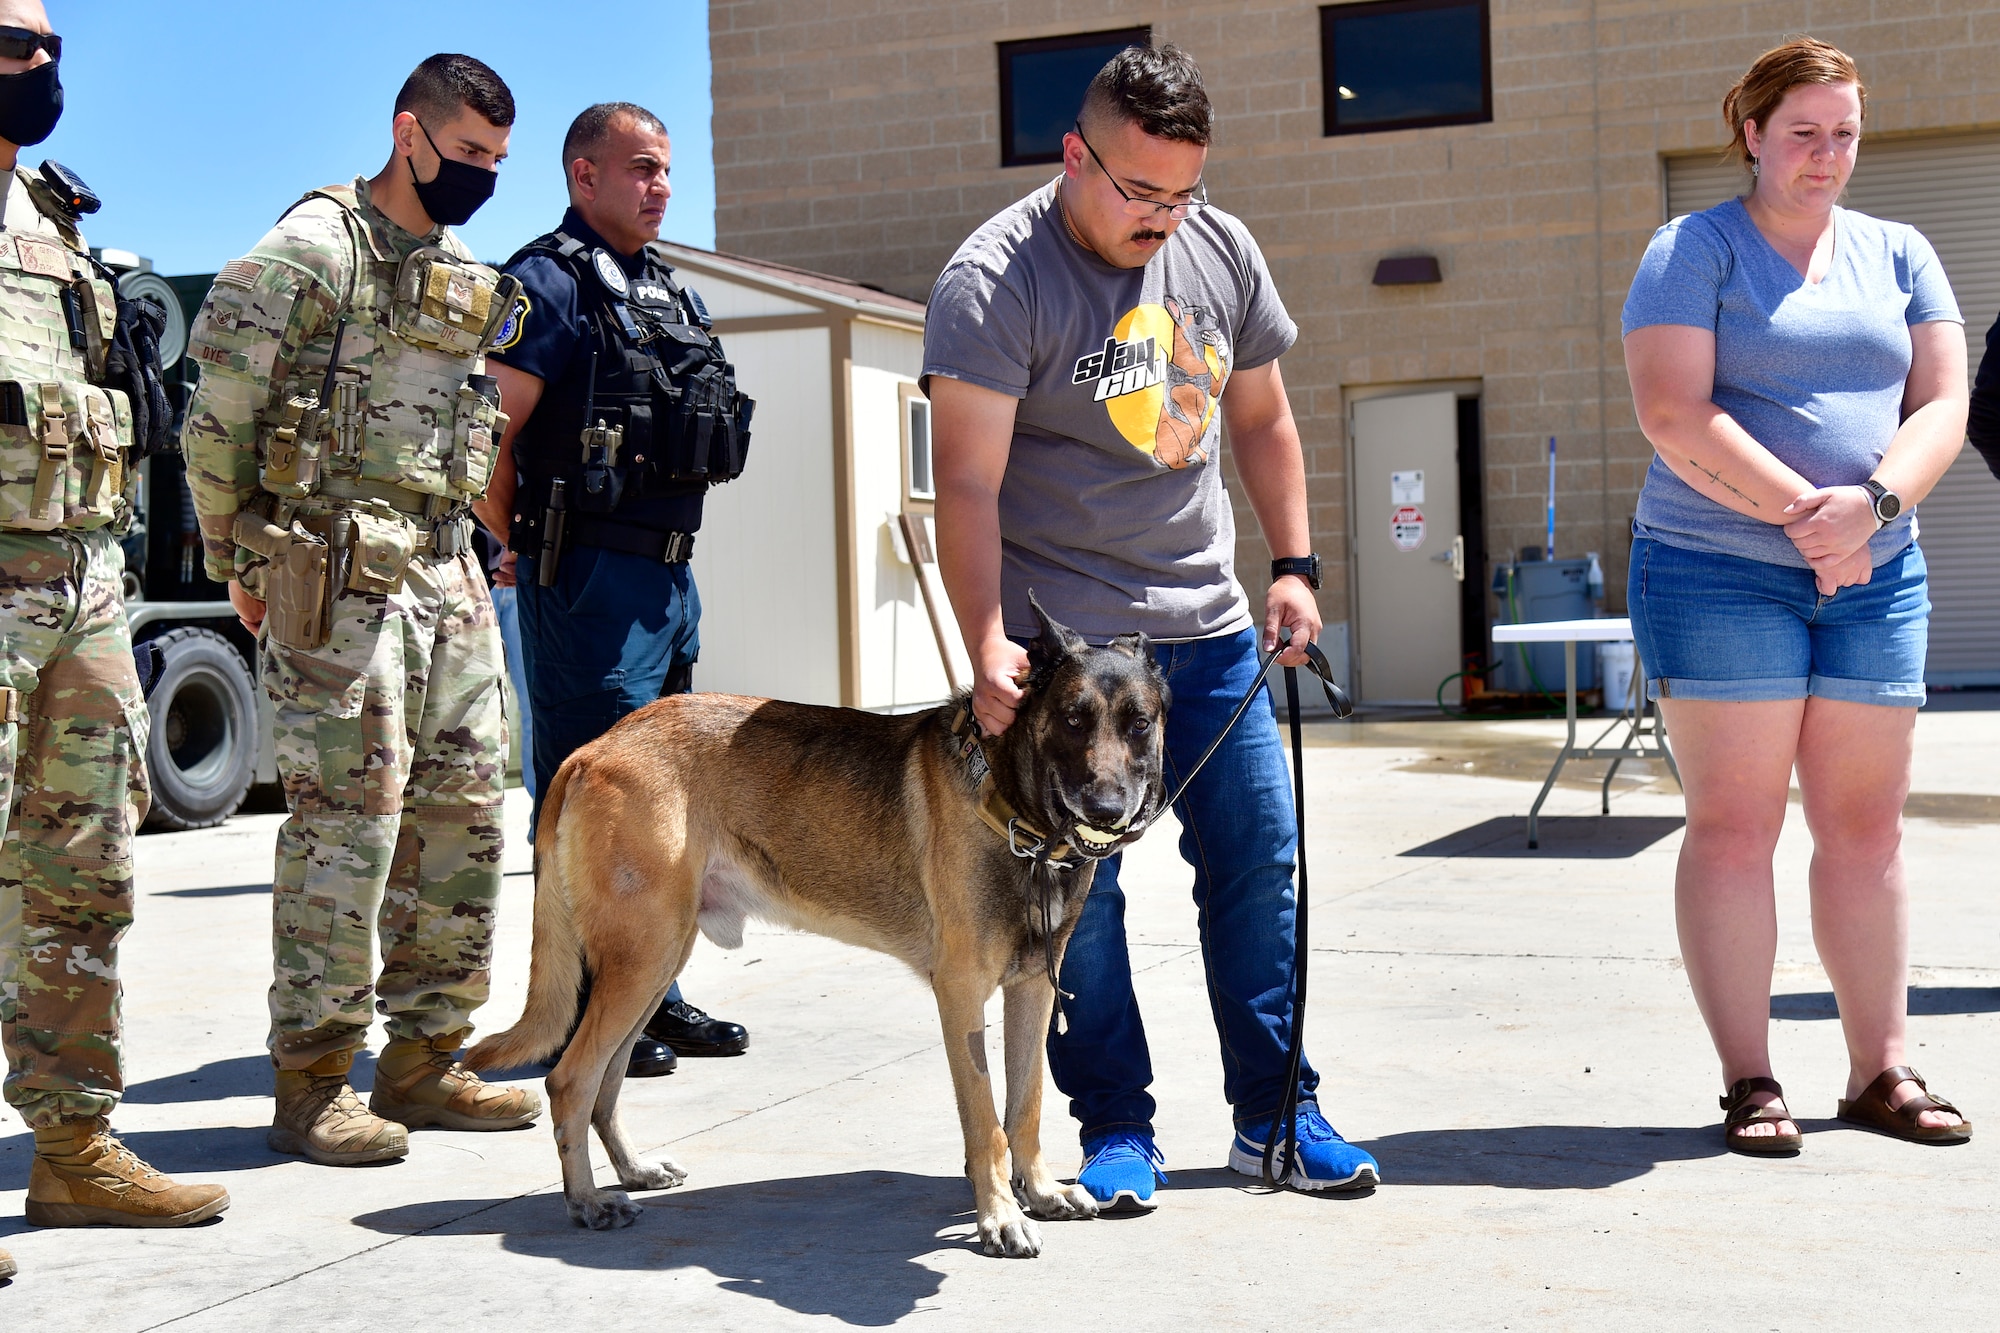 Staff Sgt Reyes pets retired military working dog Cvoky as others look on in the background.